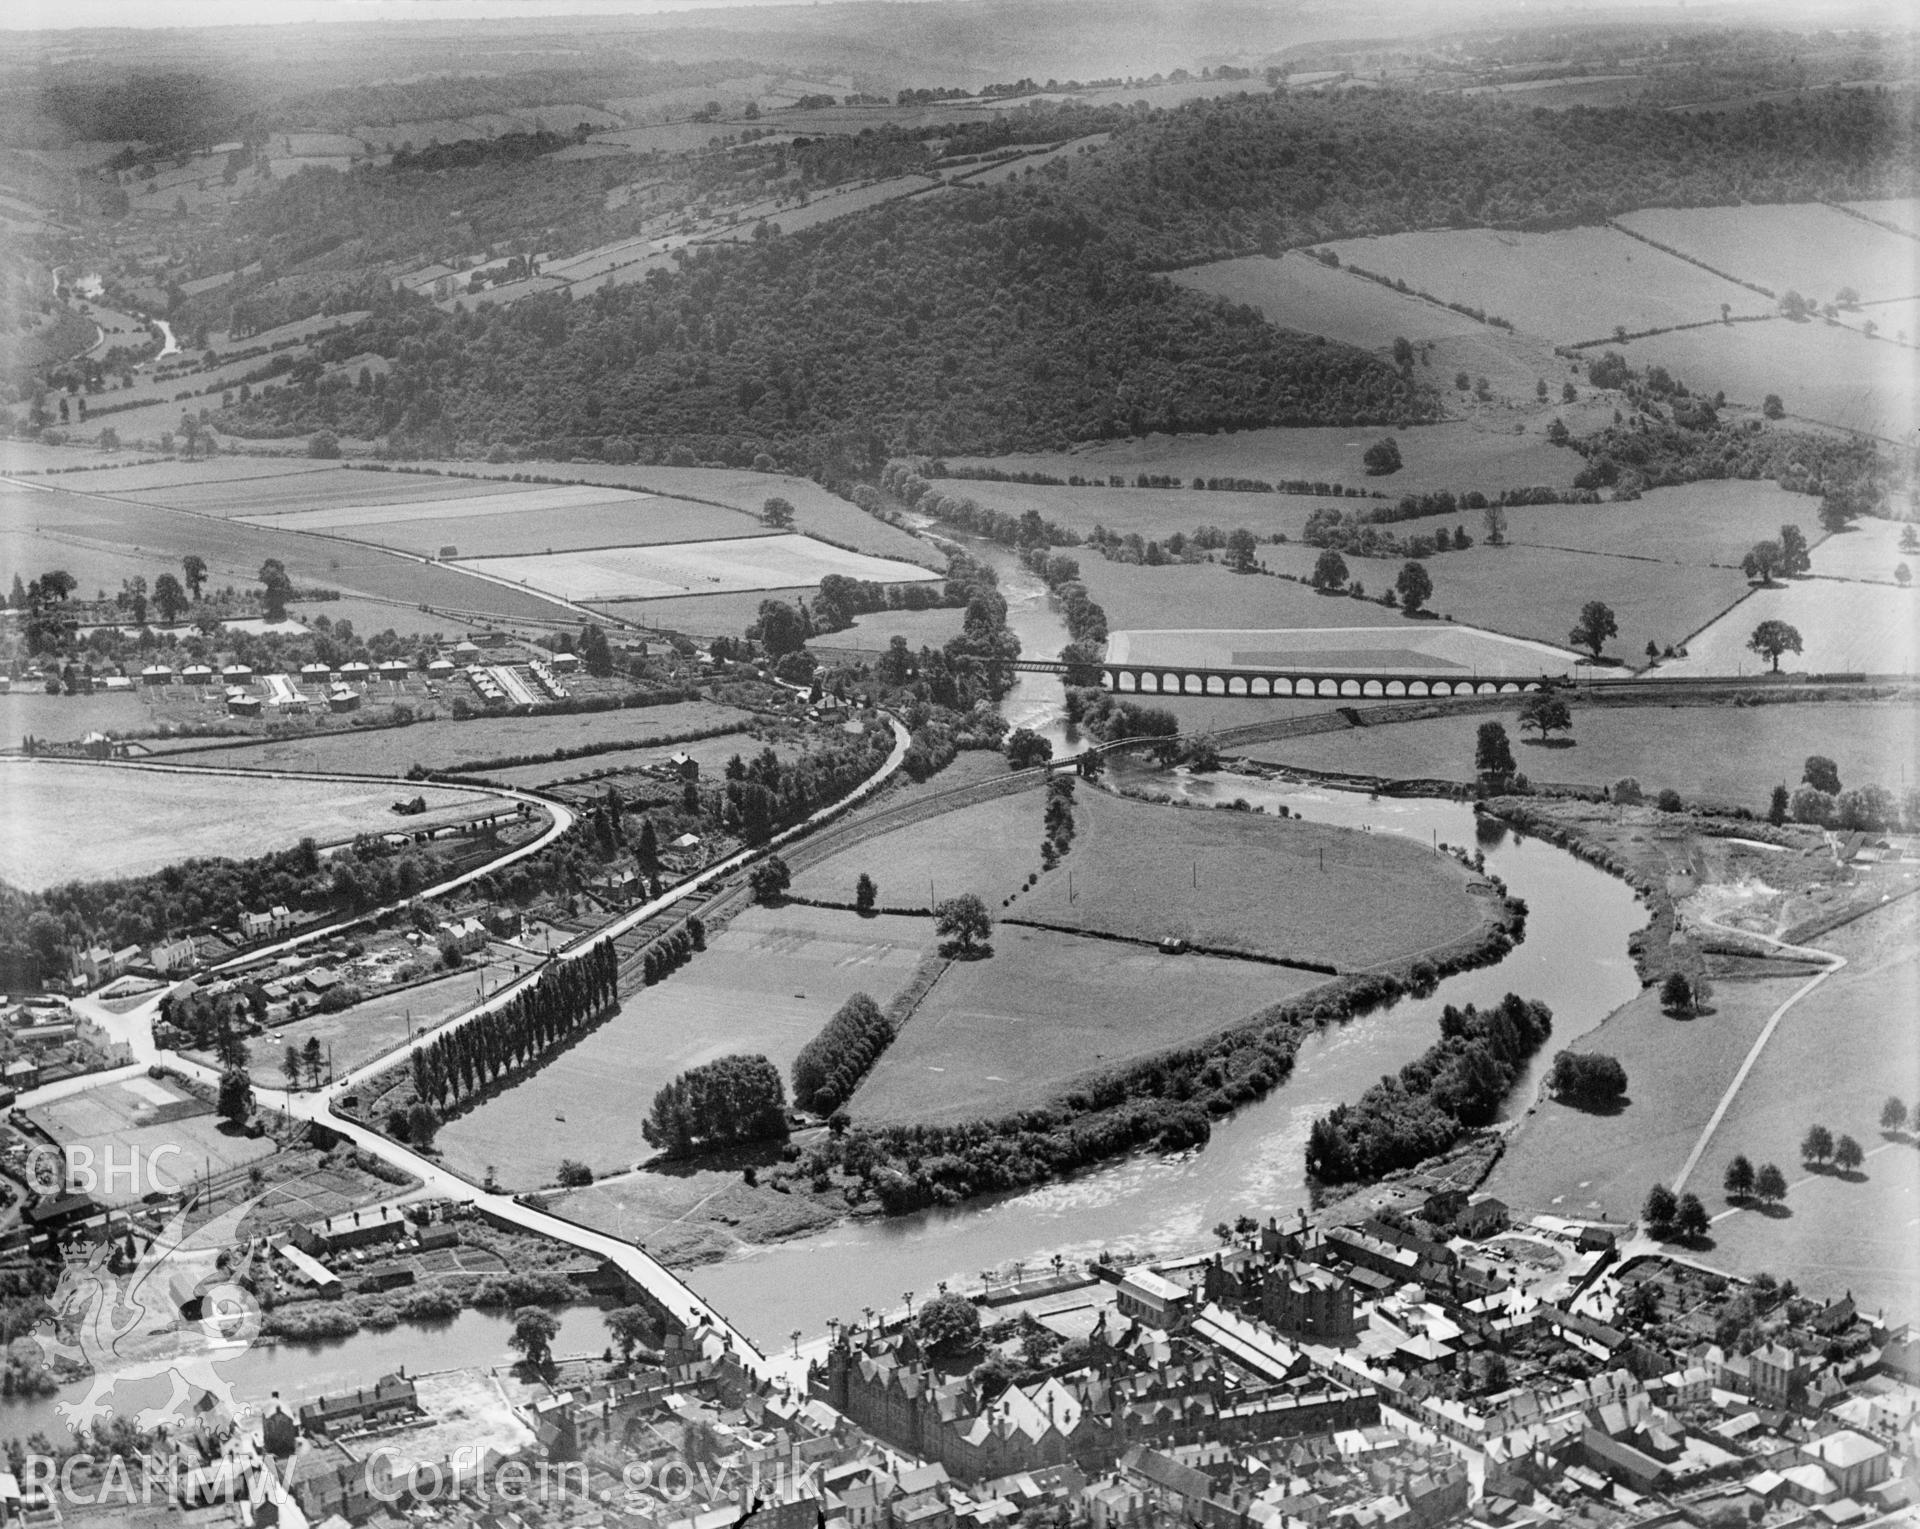 View of Monmouth showing school and viaduct, oblique aerial view. 5?x4? black and white glass plate negative.